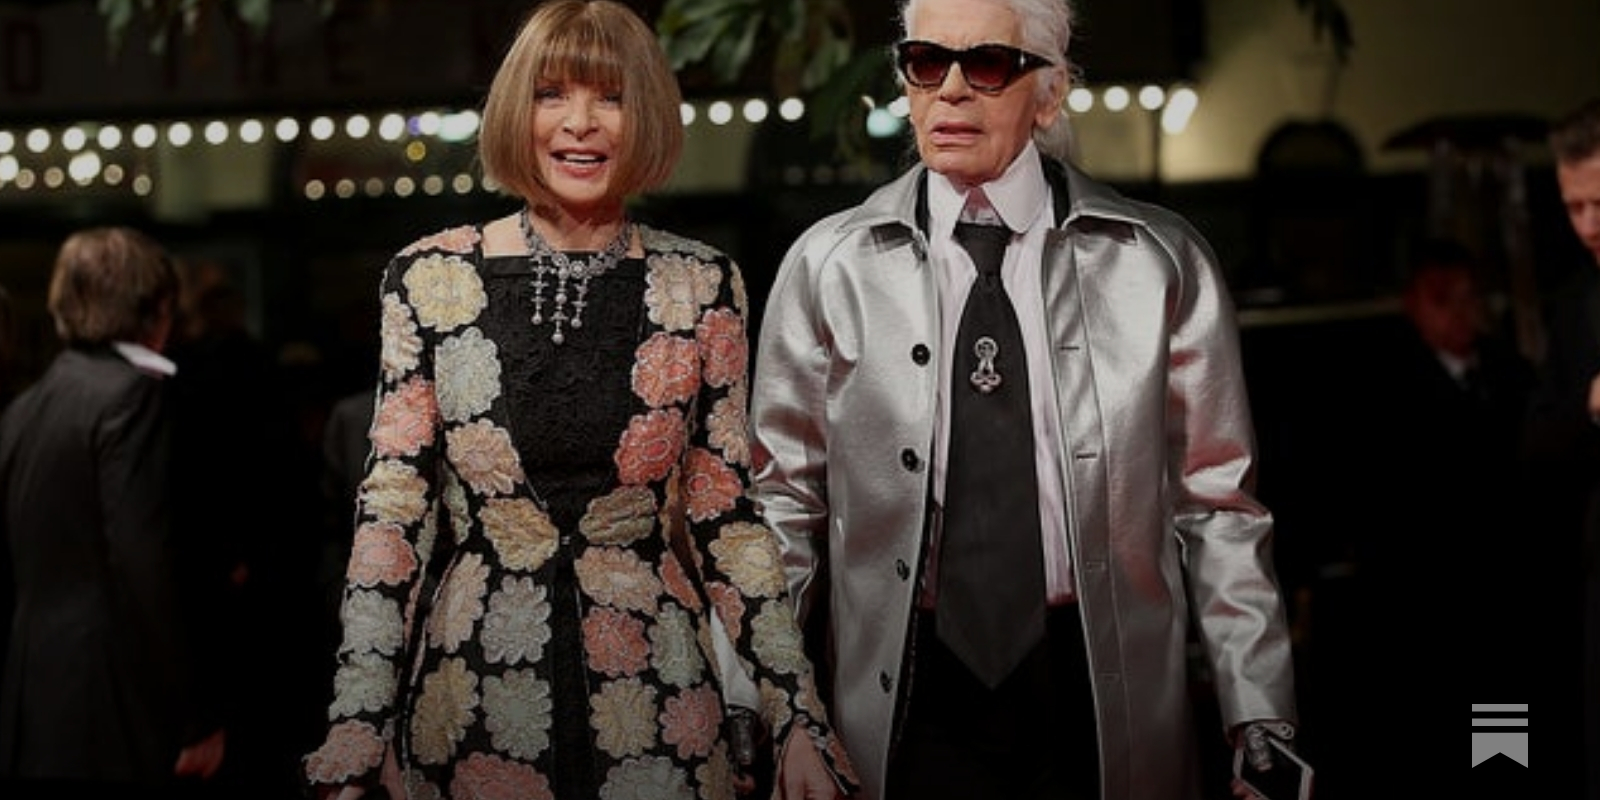 Anna Wintour and Karl Lagerfeld arriving at the Louis Vuitton art